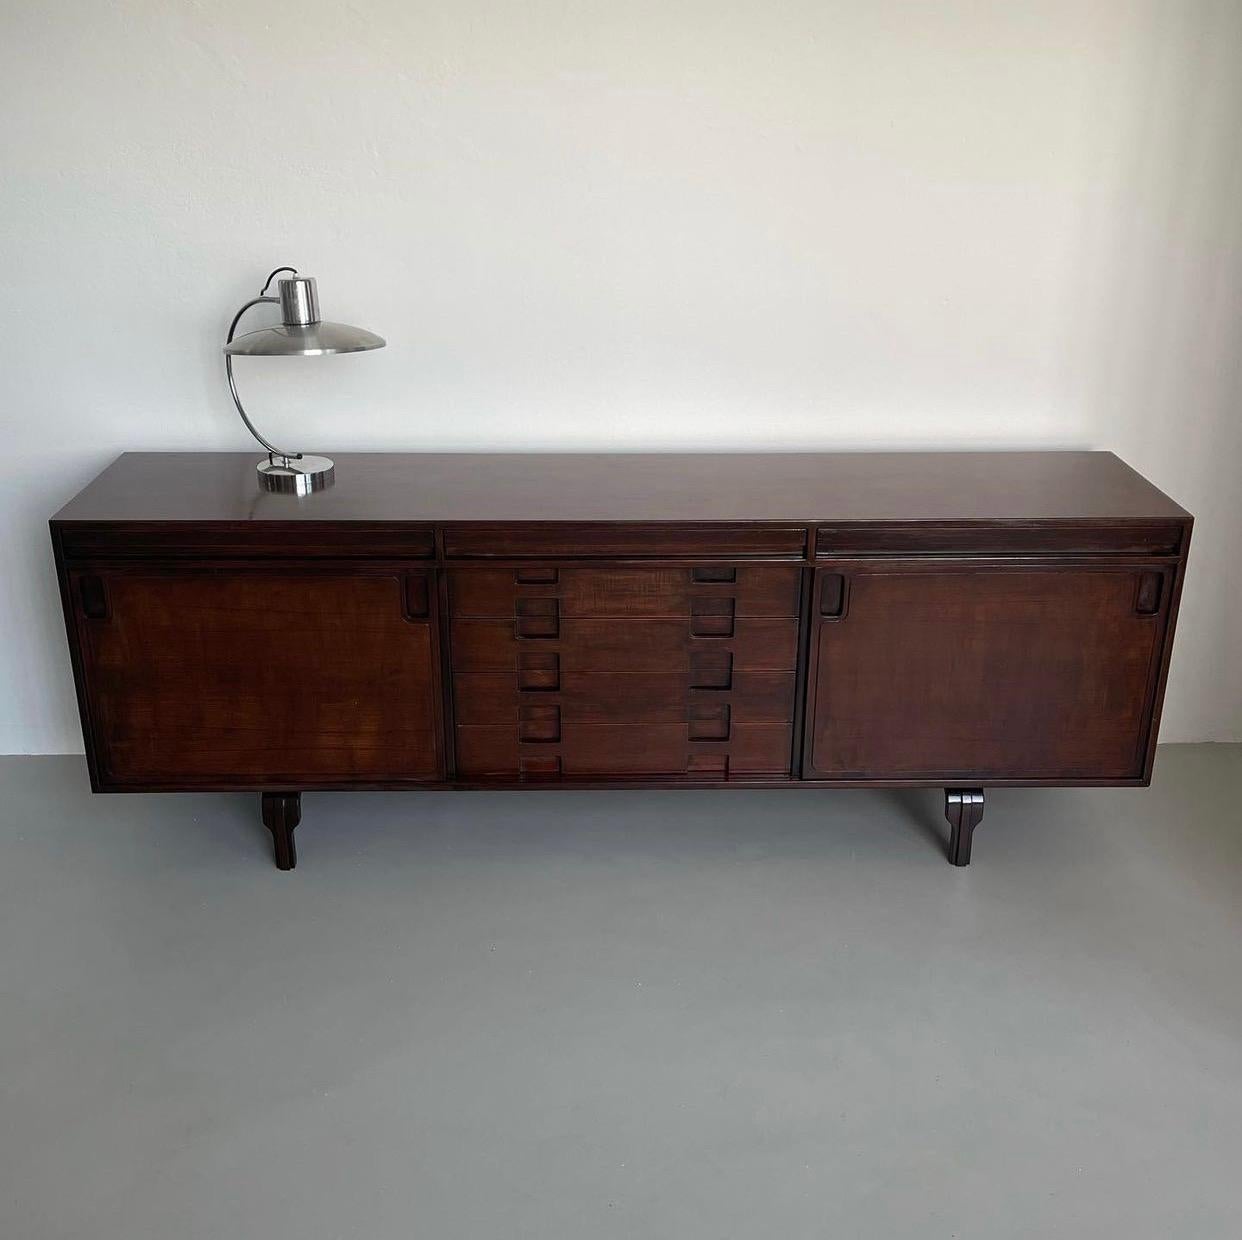 Offered here is a rare, well-executed and extremely interesting sideboard made by Saporiti. Word of mouth attributes it to Luciano Magri, a lesser known Italian designer from the 1950s and 60s. It is particularly appealing because of its refined